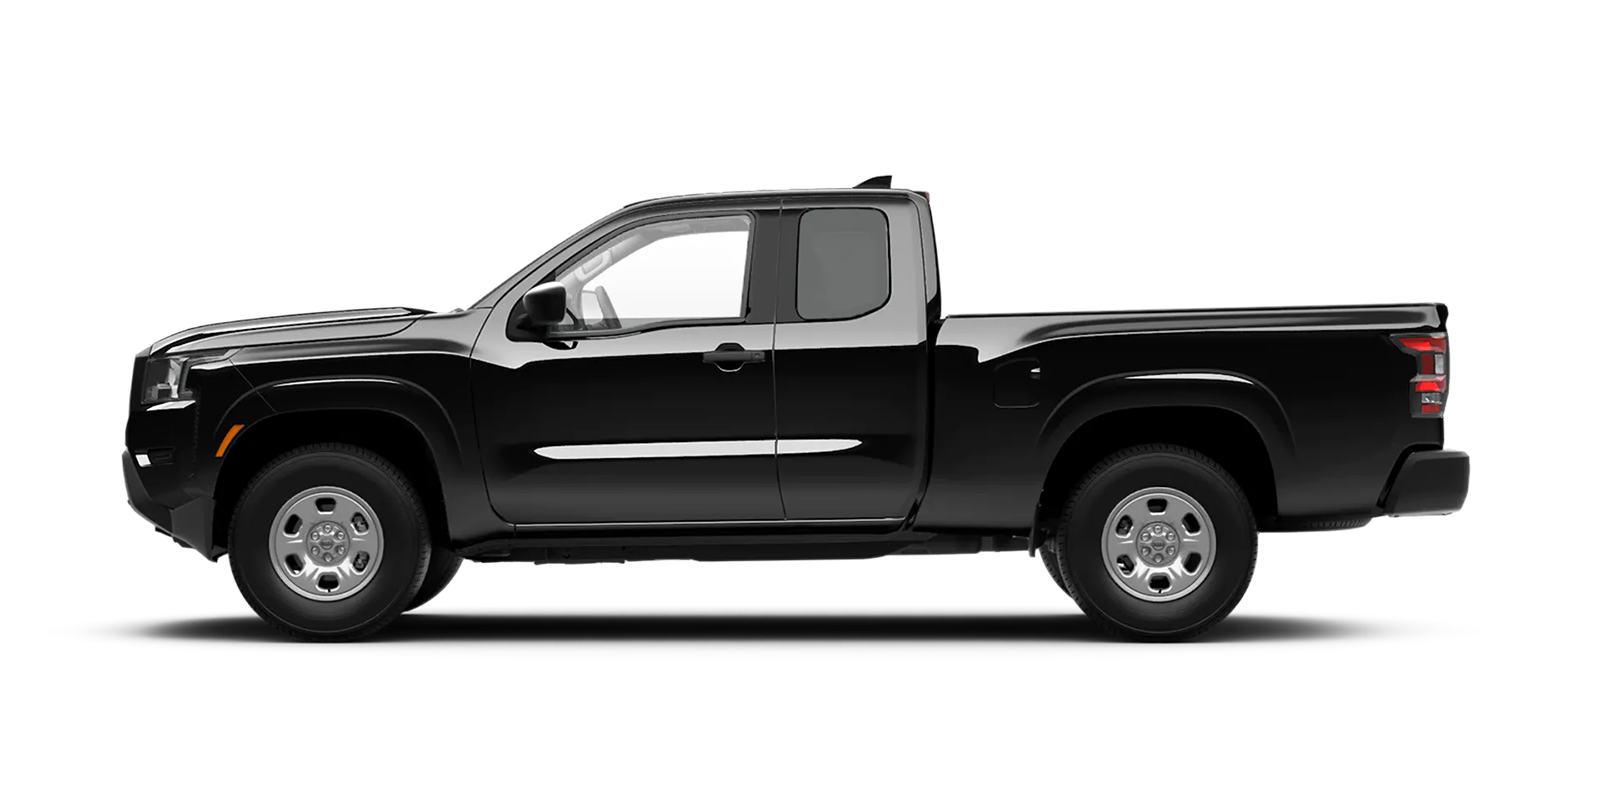 2022 Frontier King Cab S 4x4 in Super Black | San Leandro Nissan in San Leandro CA